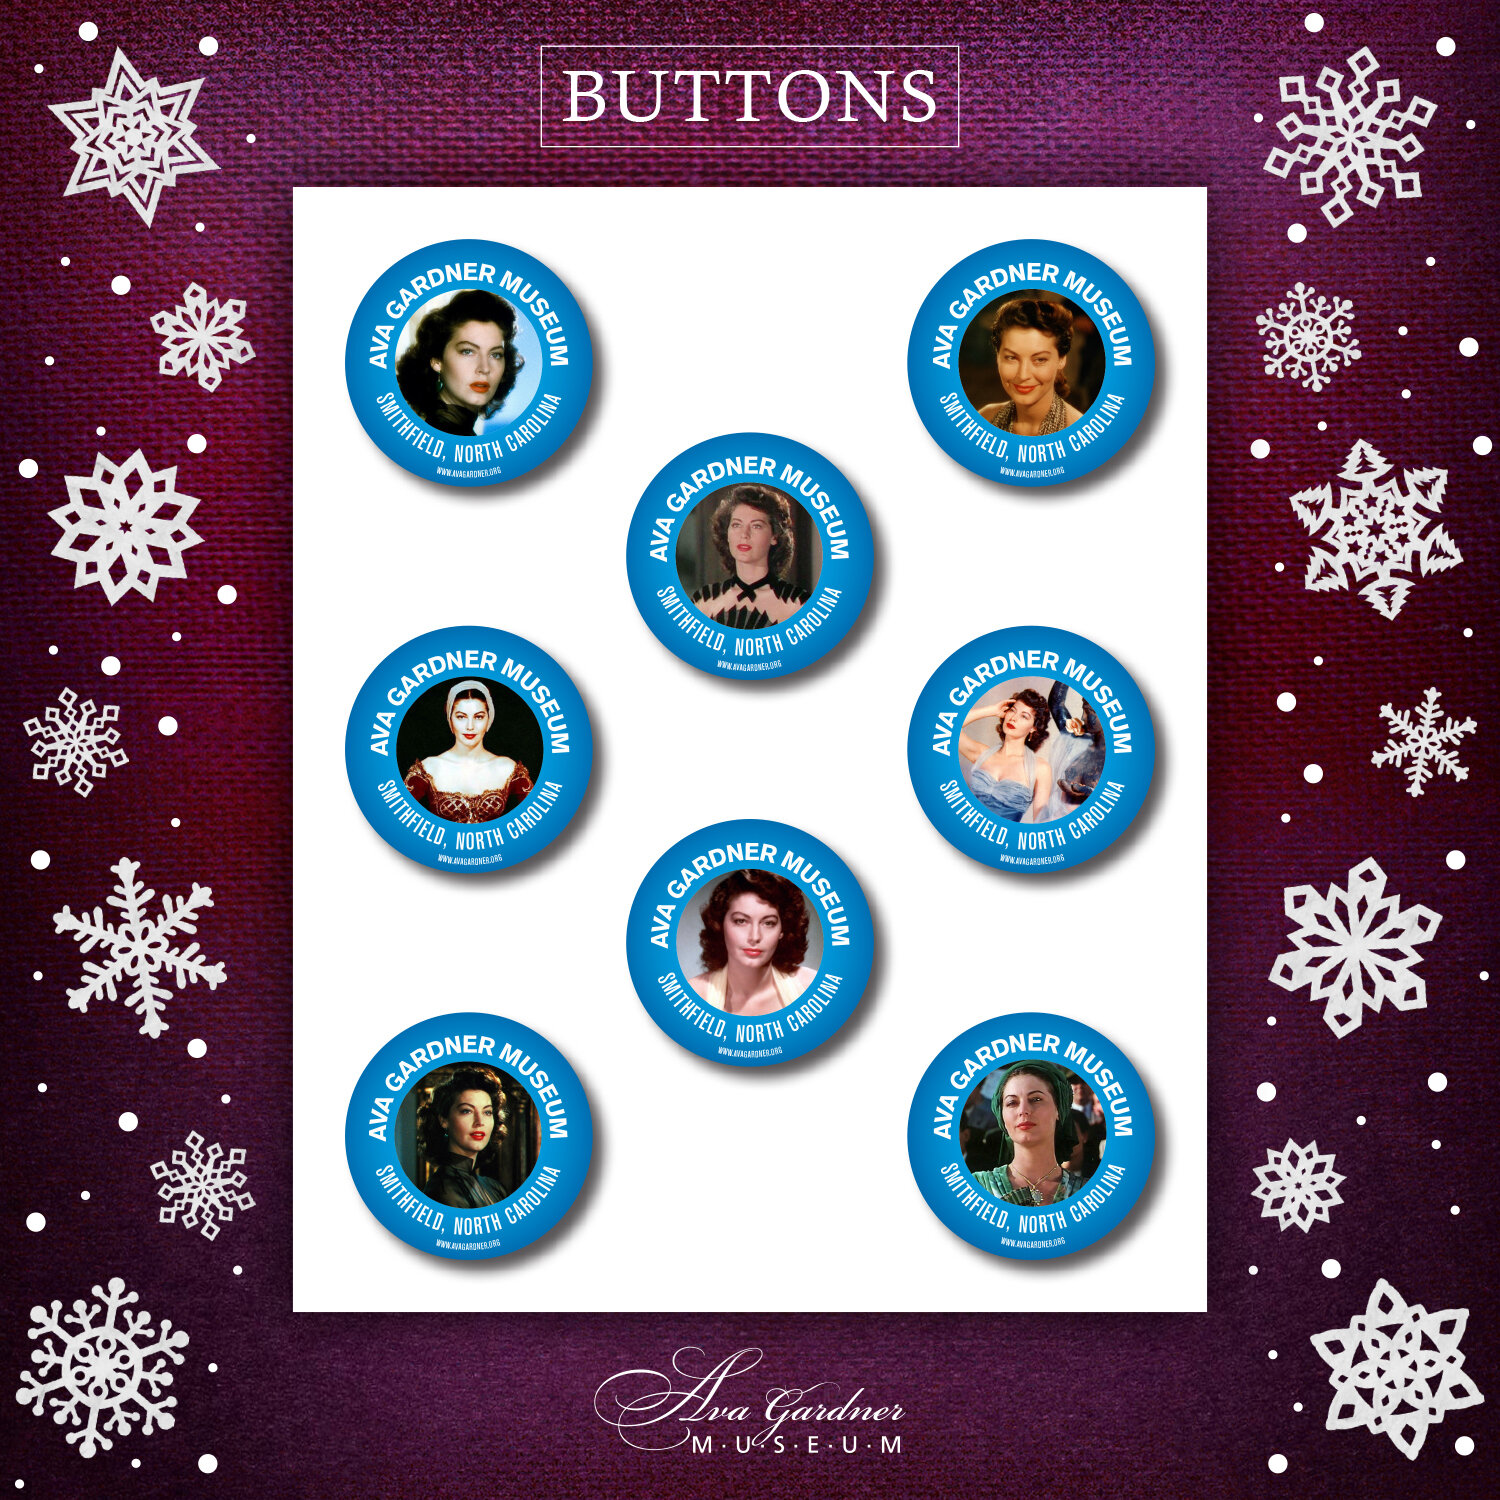 AGM_HolidayGiftGuide_2020_Buttons.jpg